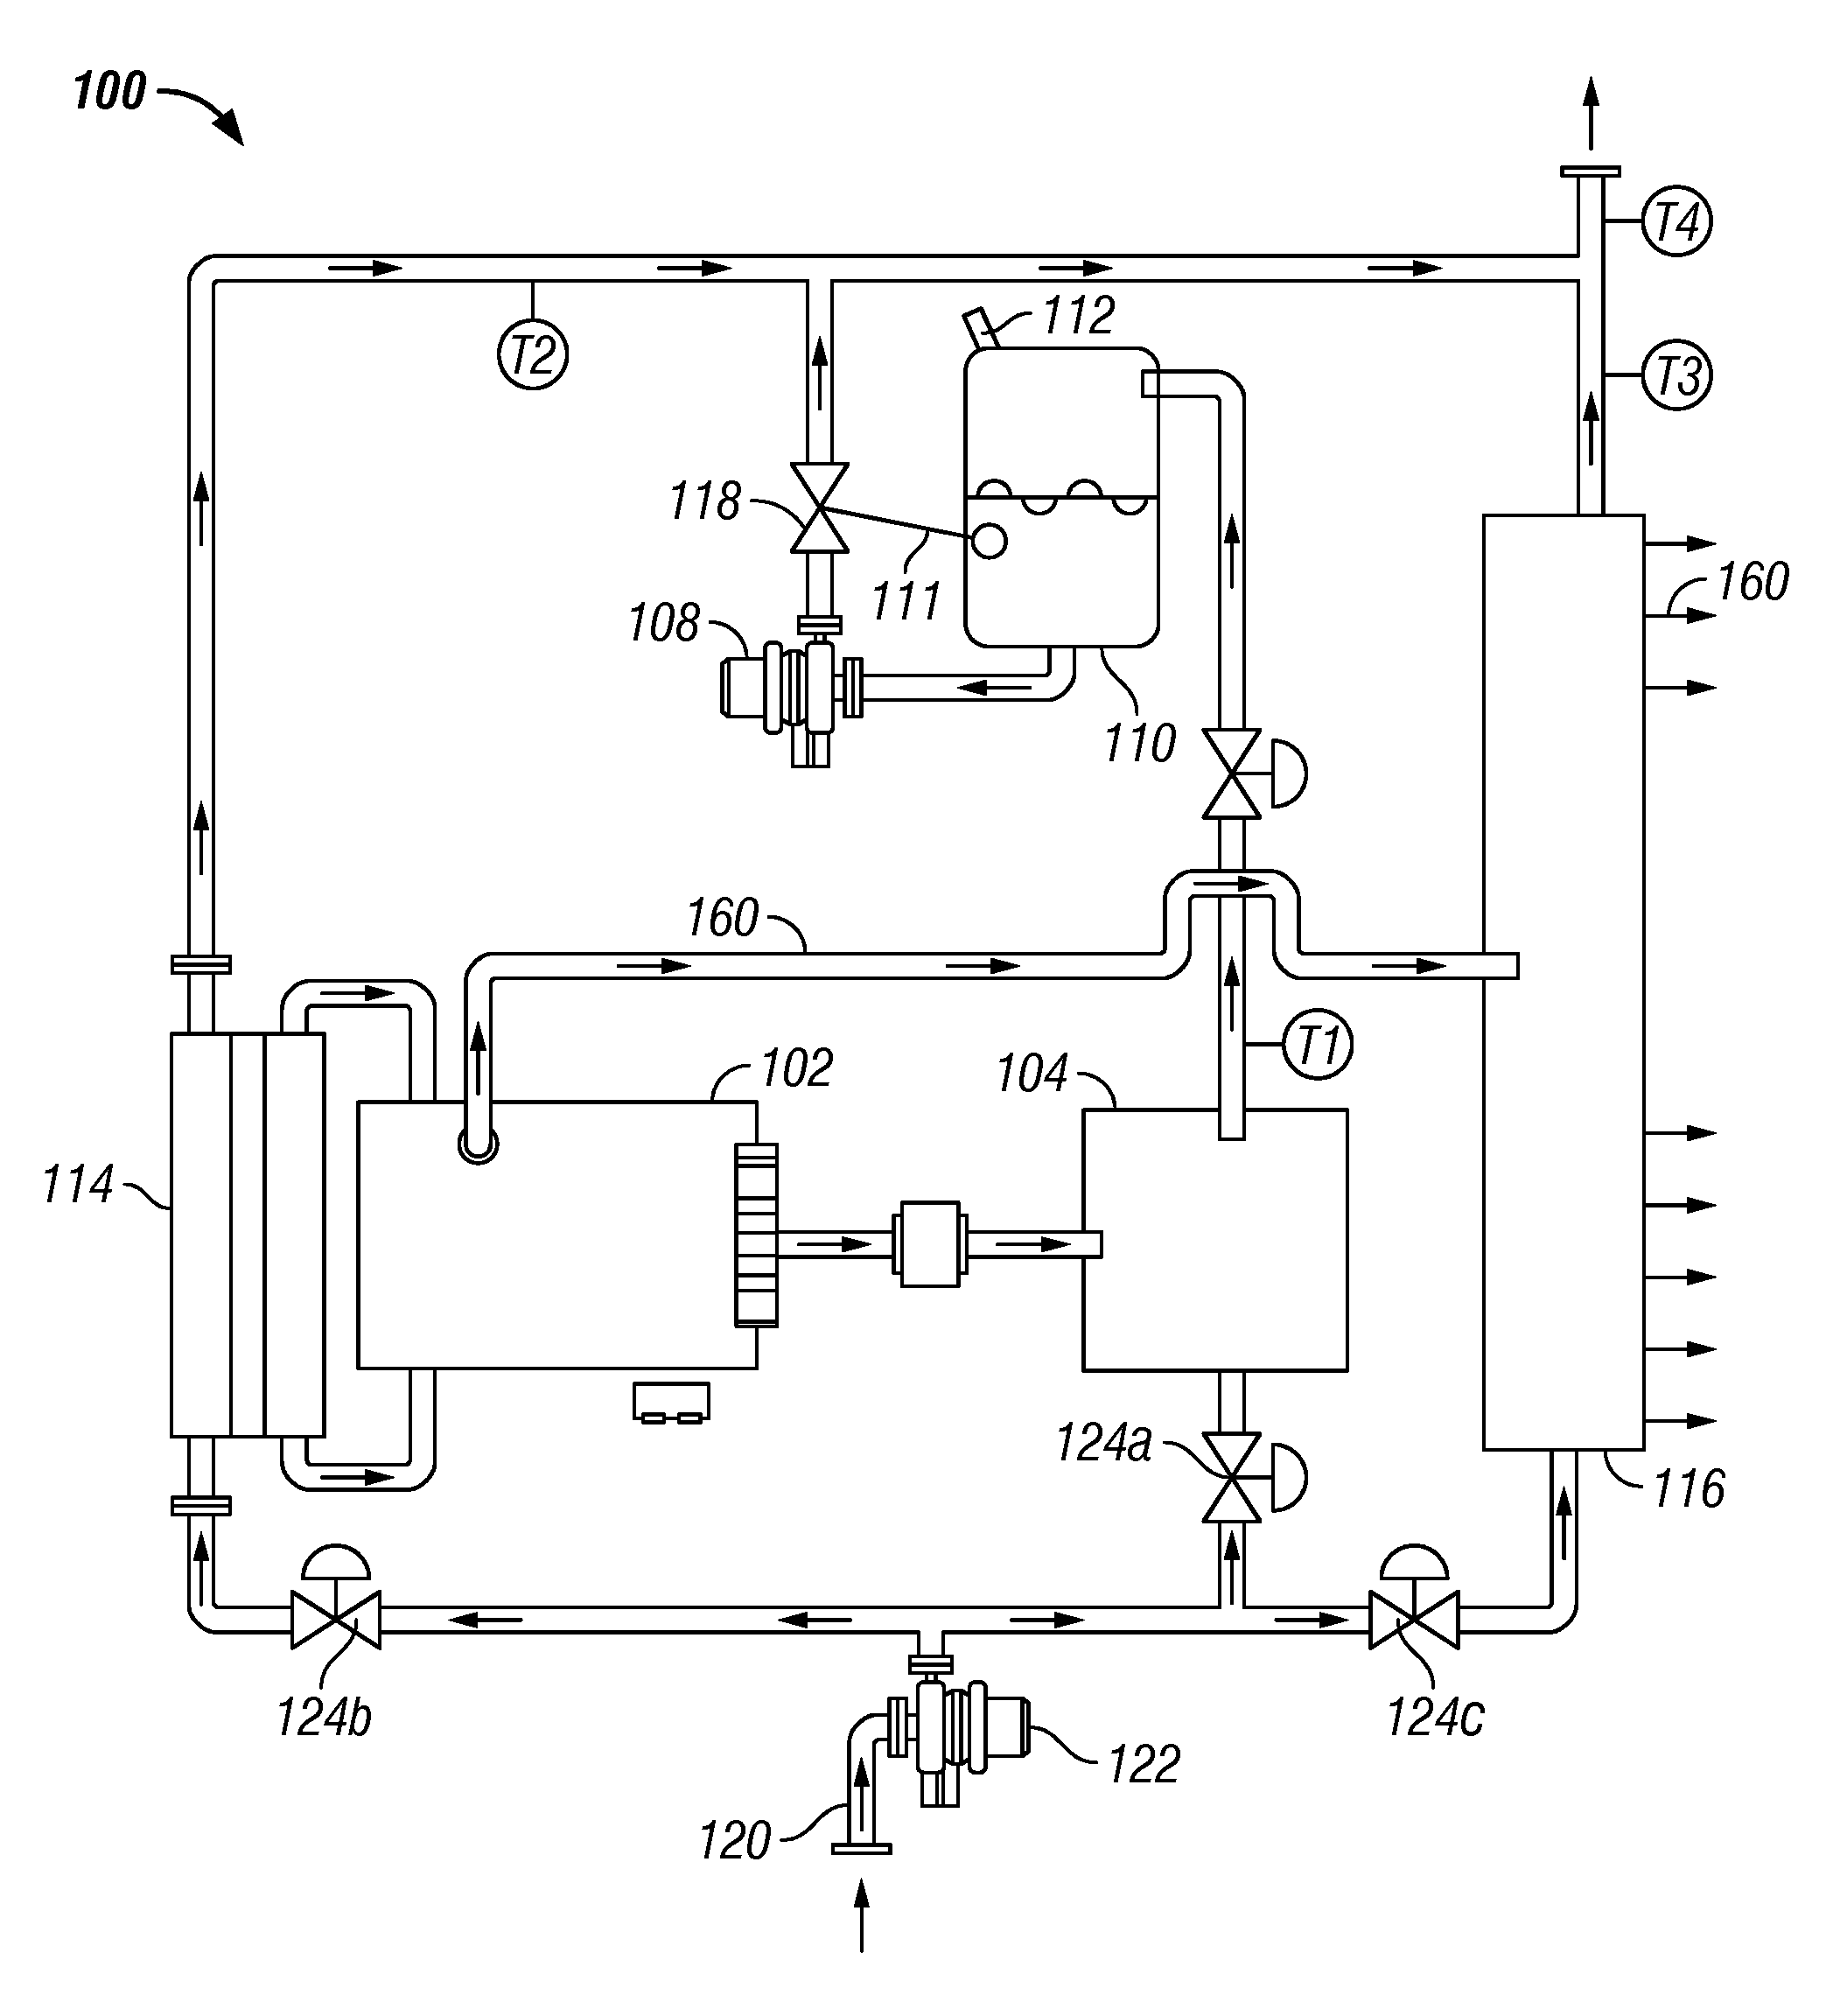 Methods and apparatuses for heating, concentrating and evaporating fluid